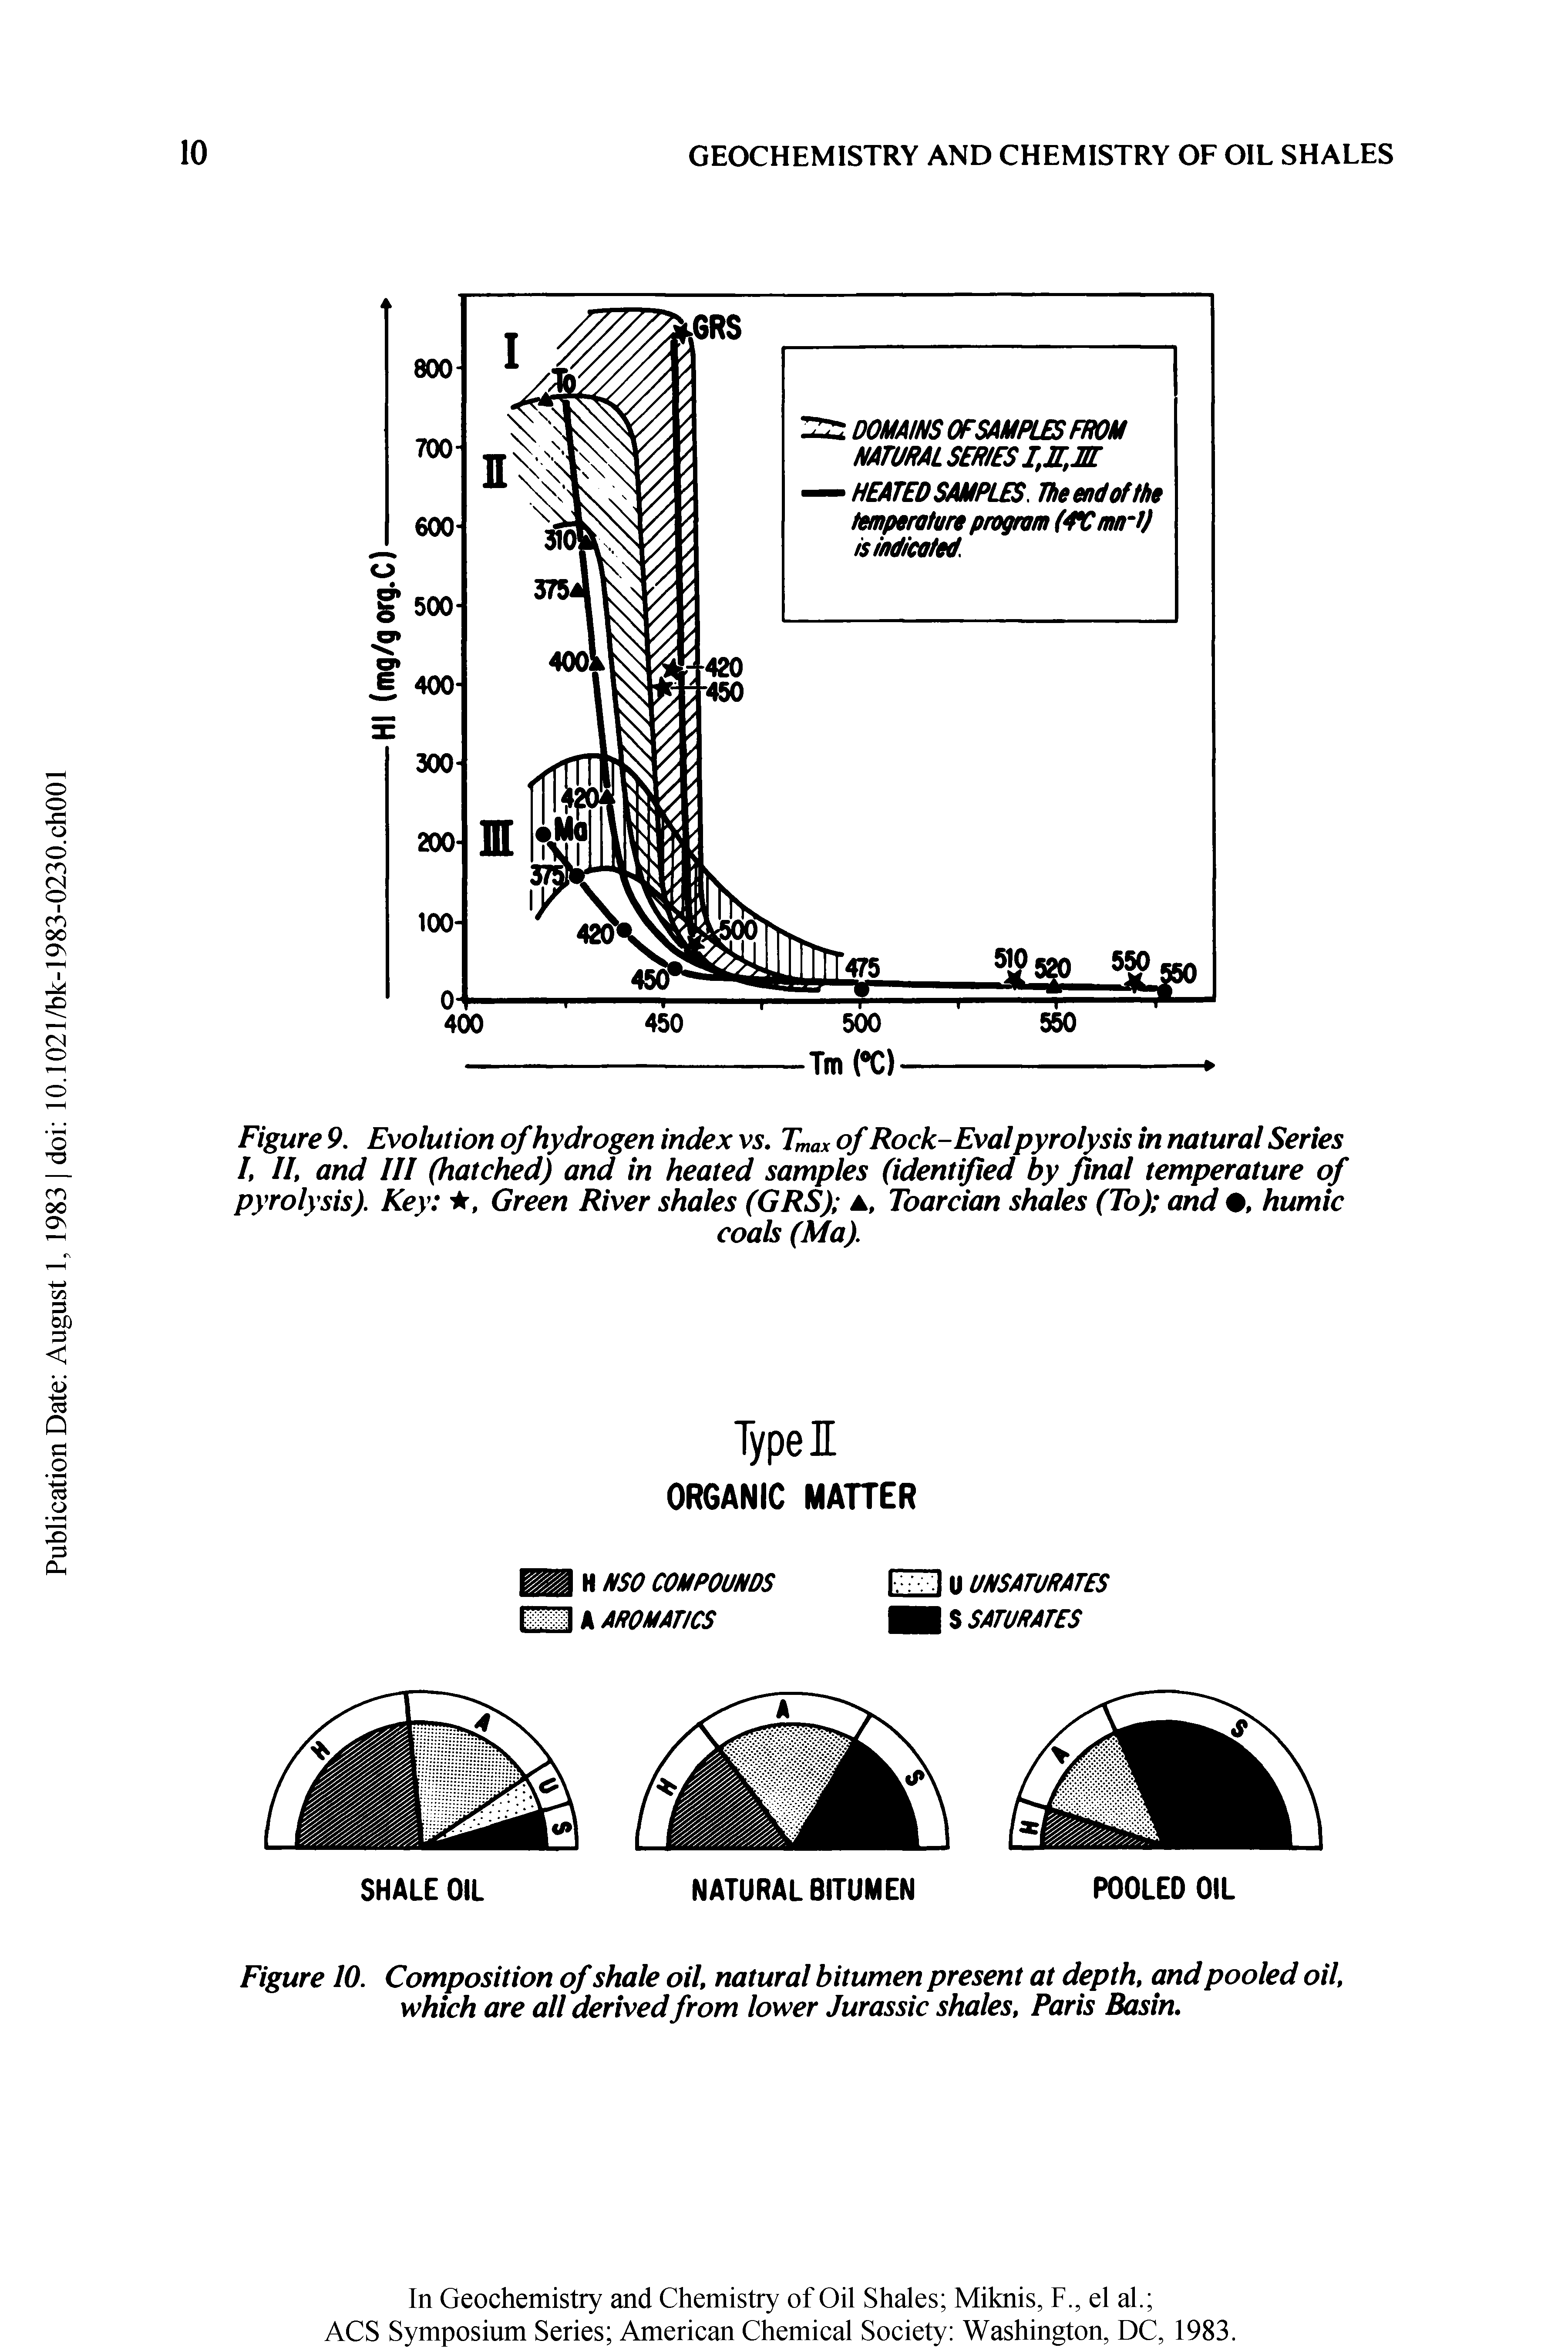 Figure 10. Composition of shale oil, natural bitumen present at depth, and pooled oil, which are all derived from lower Jurassic shales, Paris Basin.